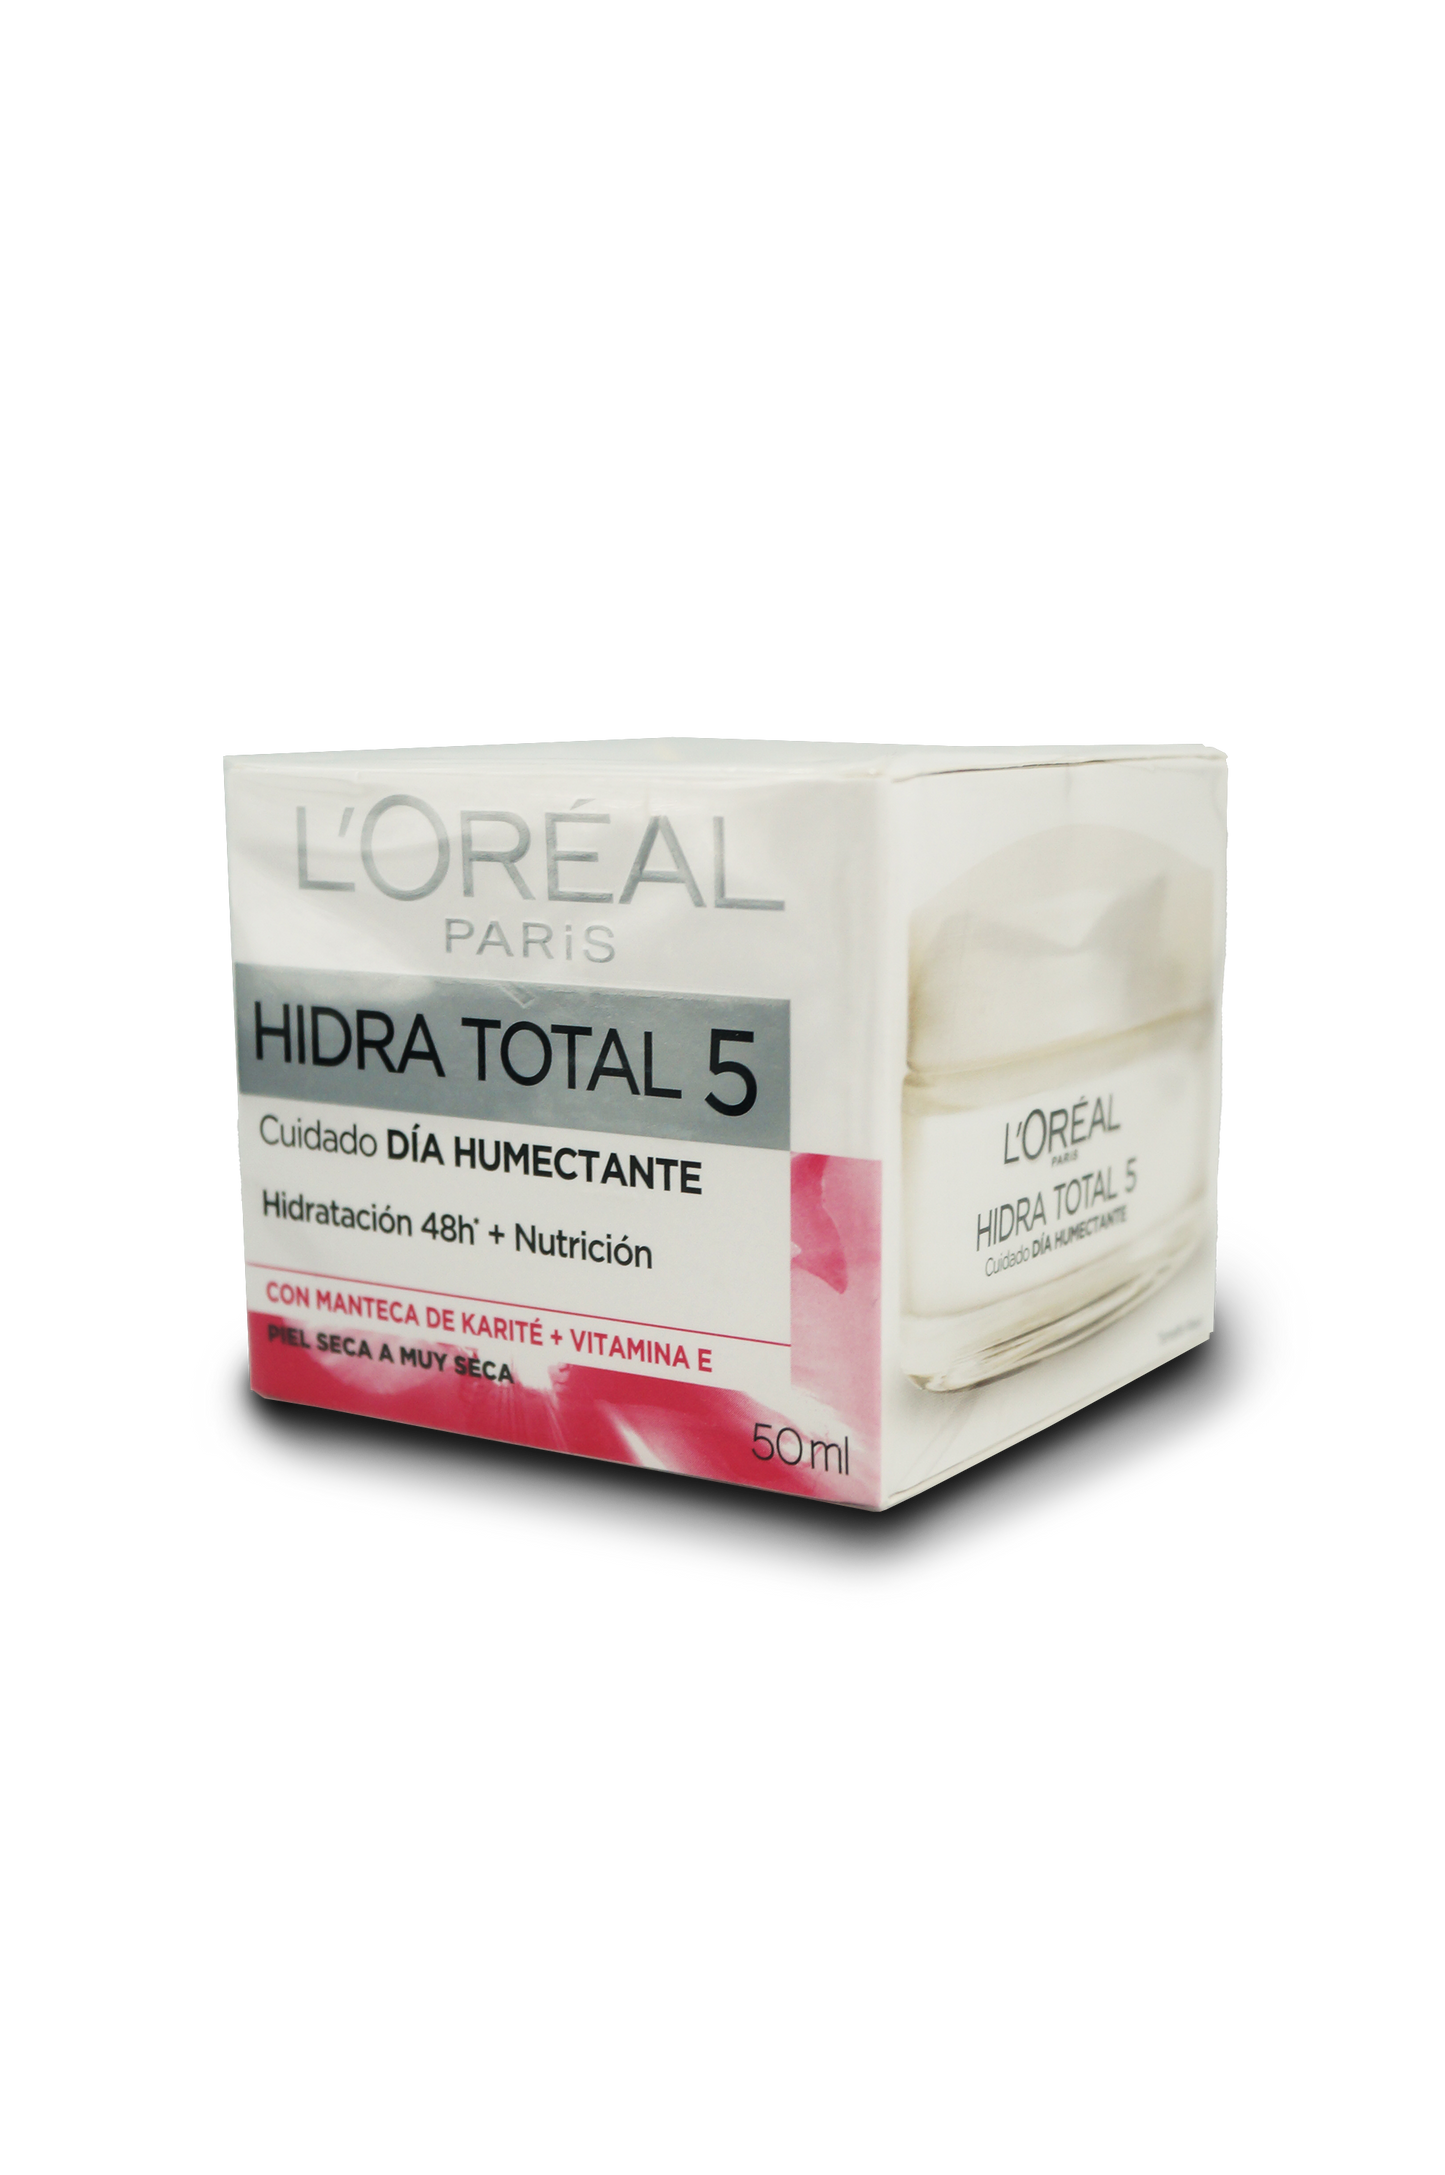 L'Oreal hidra total 5 humectante día 50mL